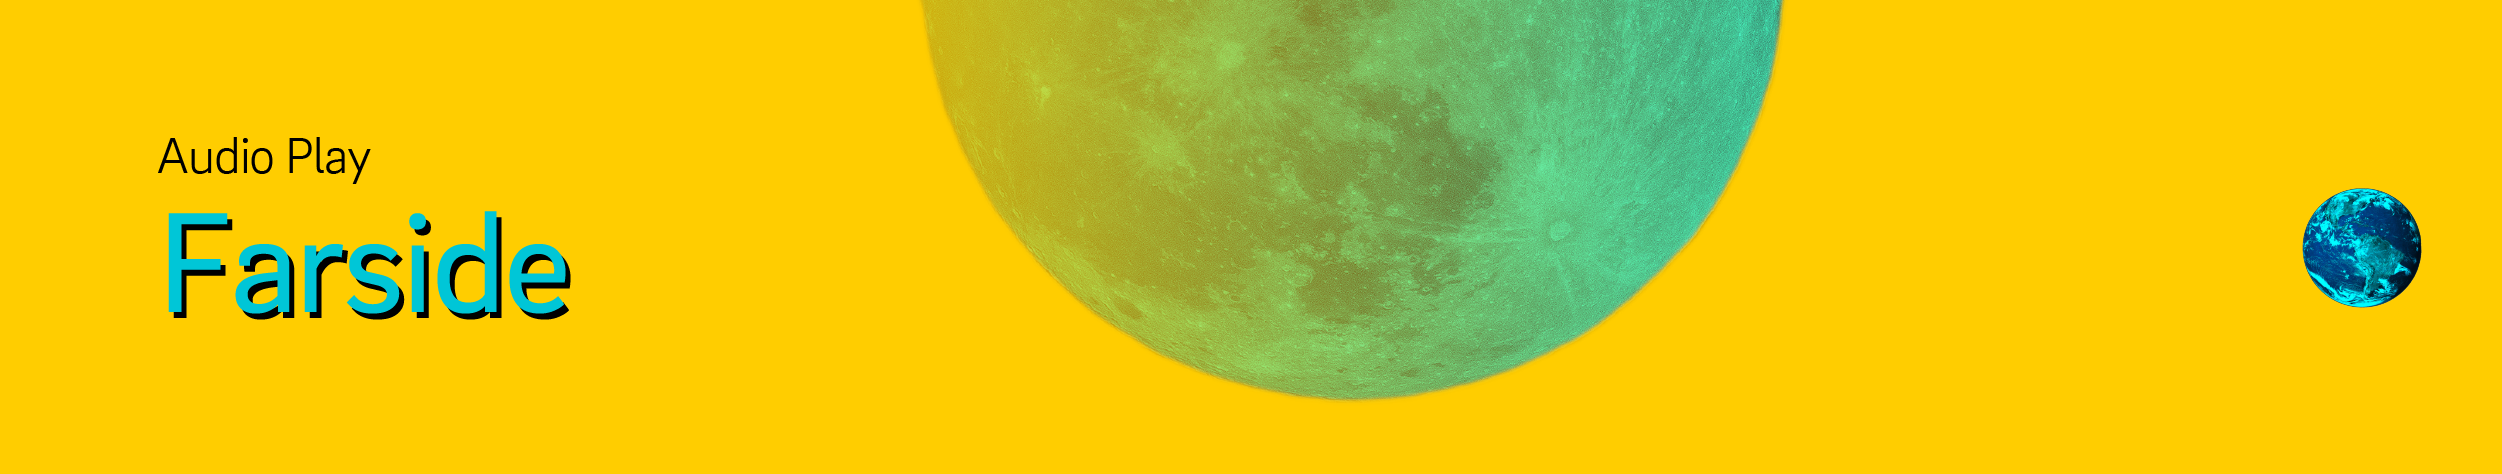 a blue moon and earth on a yellow background